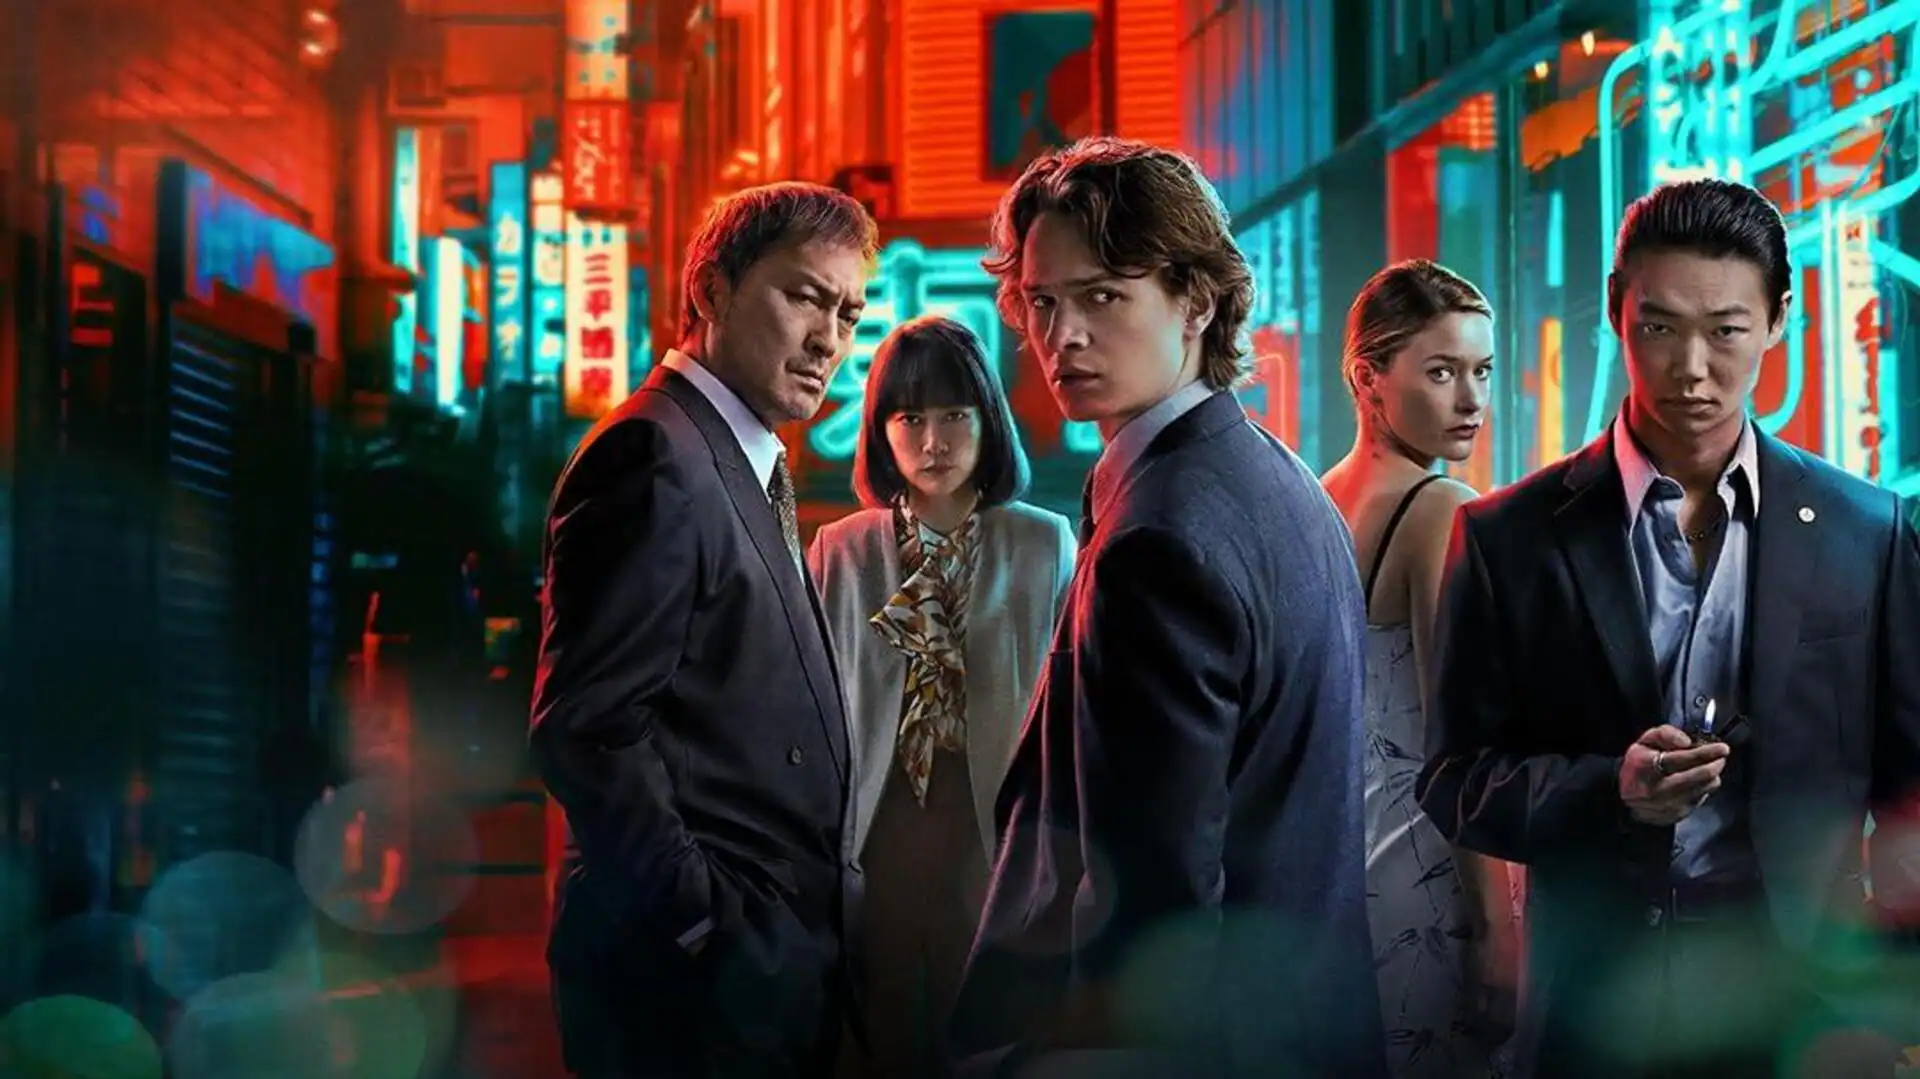 Max Series 'Tokyo Vice' Wraps Up After Two Seasons: Creators Reflect on Journey!